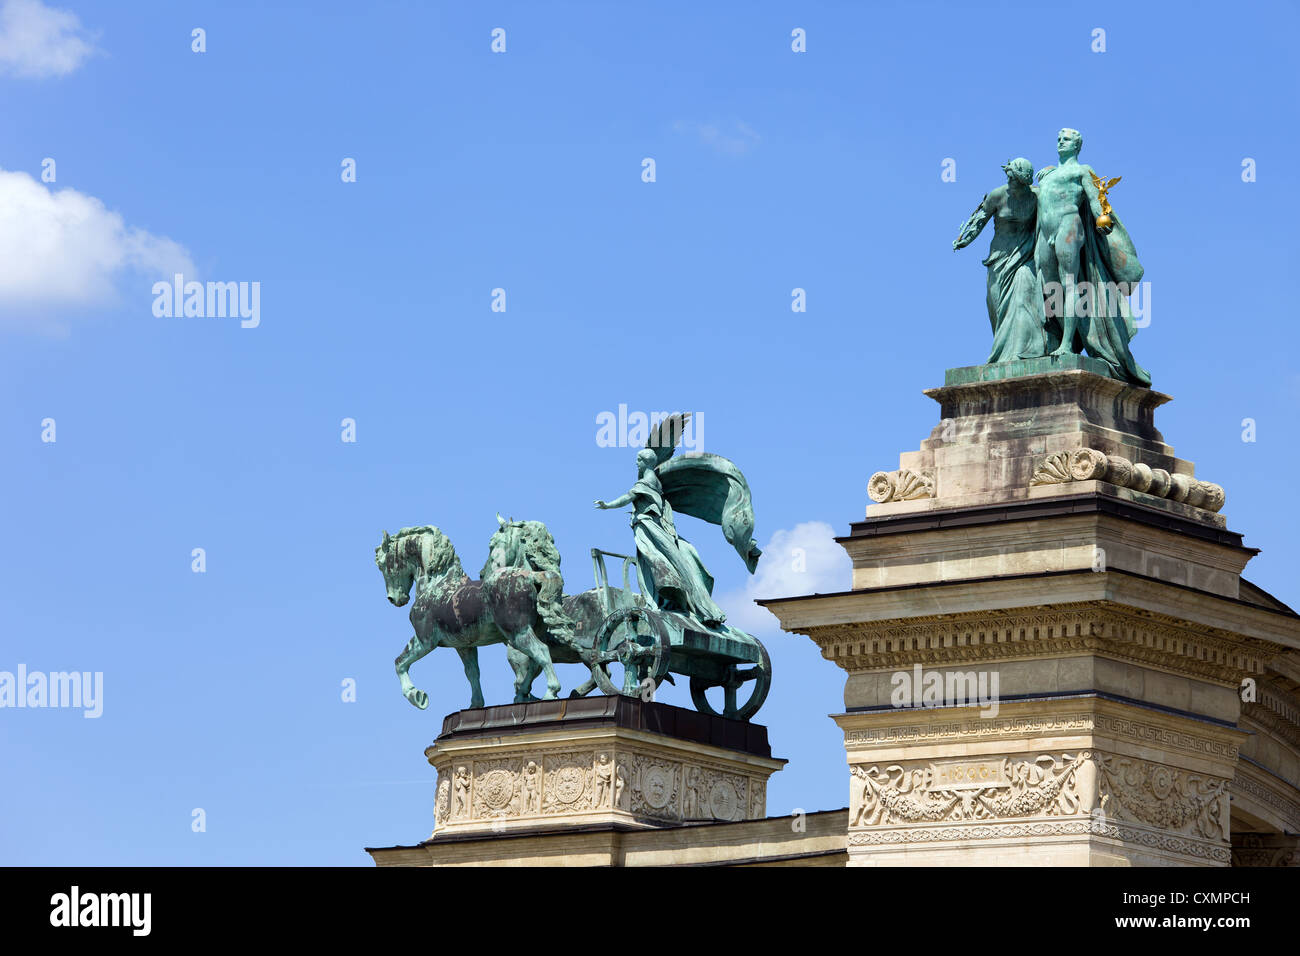 Millennium Monument on the Heroes Square in Budapest, Hungary with statues symbolizing Peace, Knowledge and Glory. Stock Photo